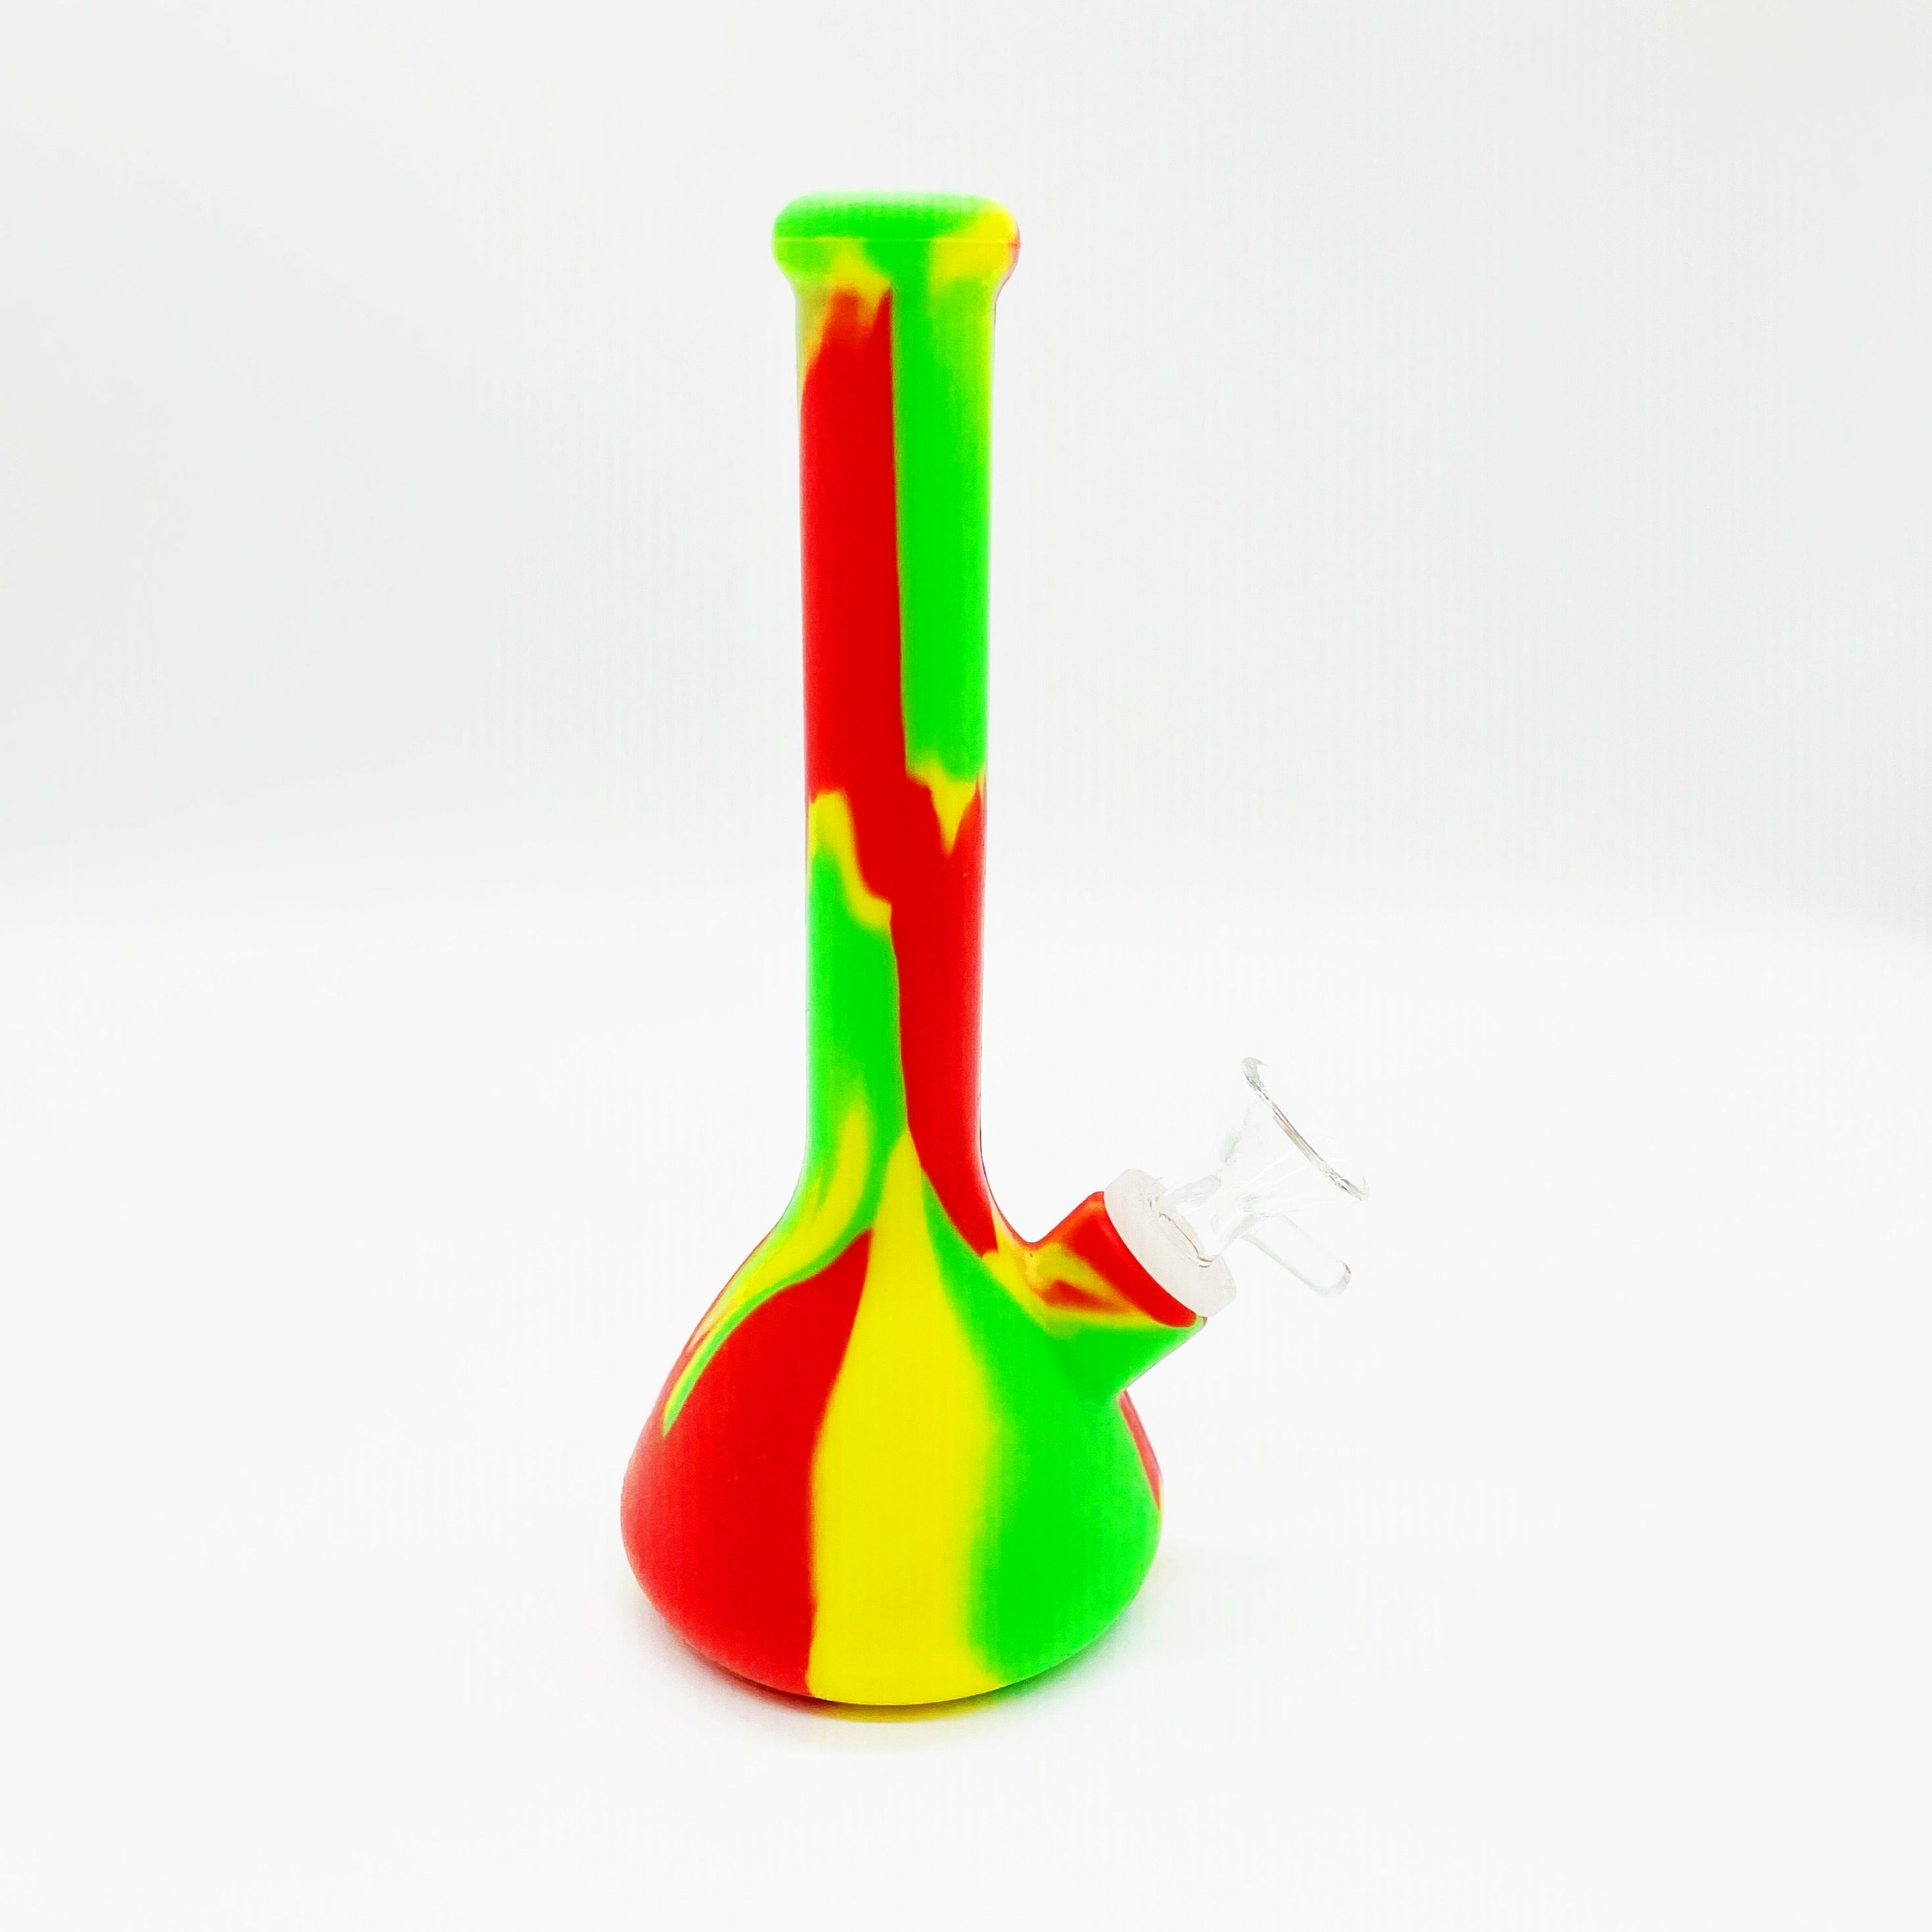 7" Rasta Colored Silicone Waterpipe with Glass Bowl Wholesale